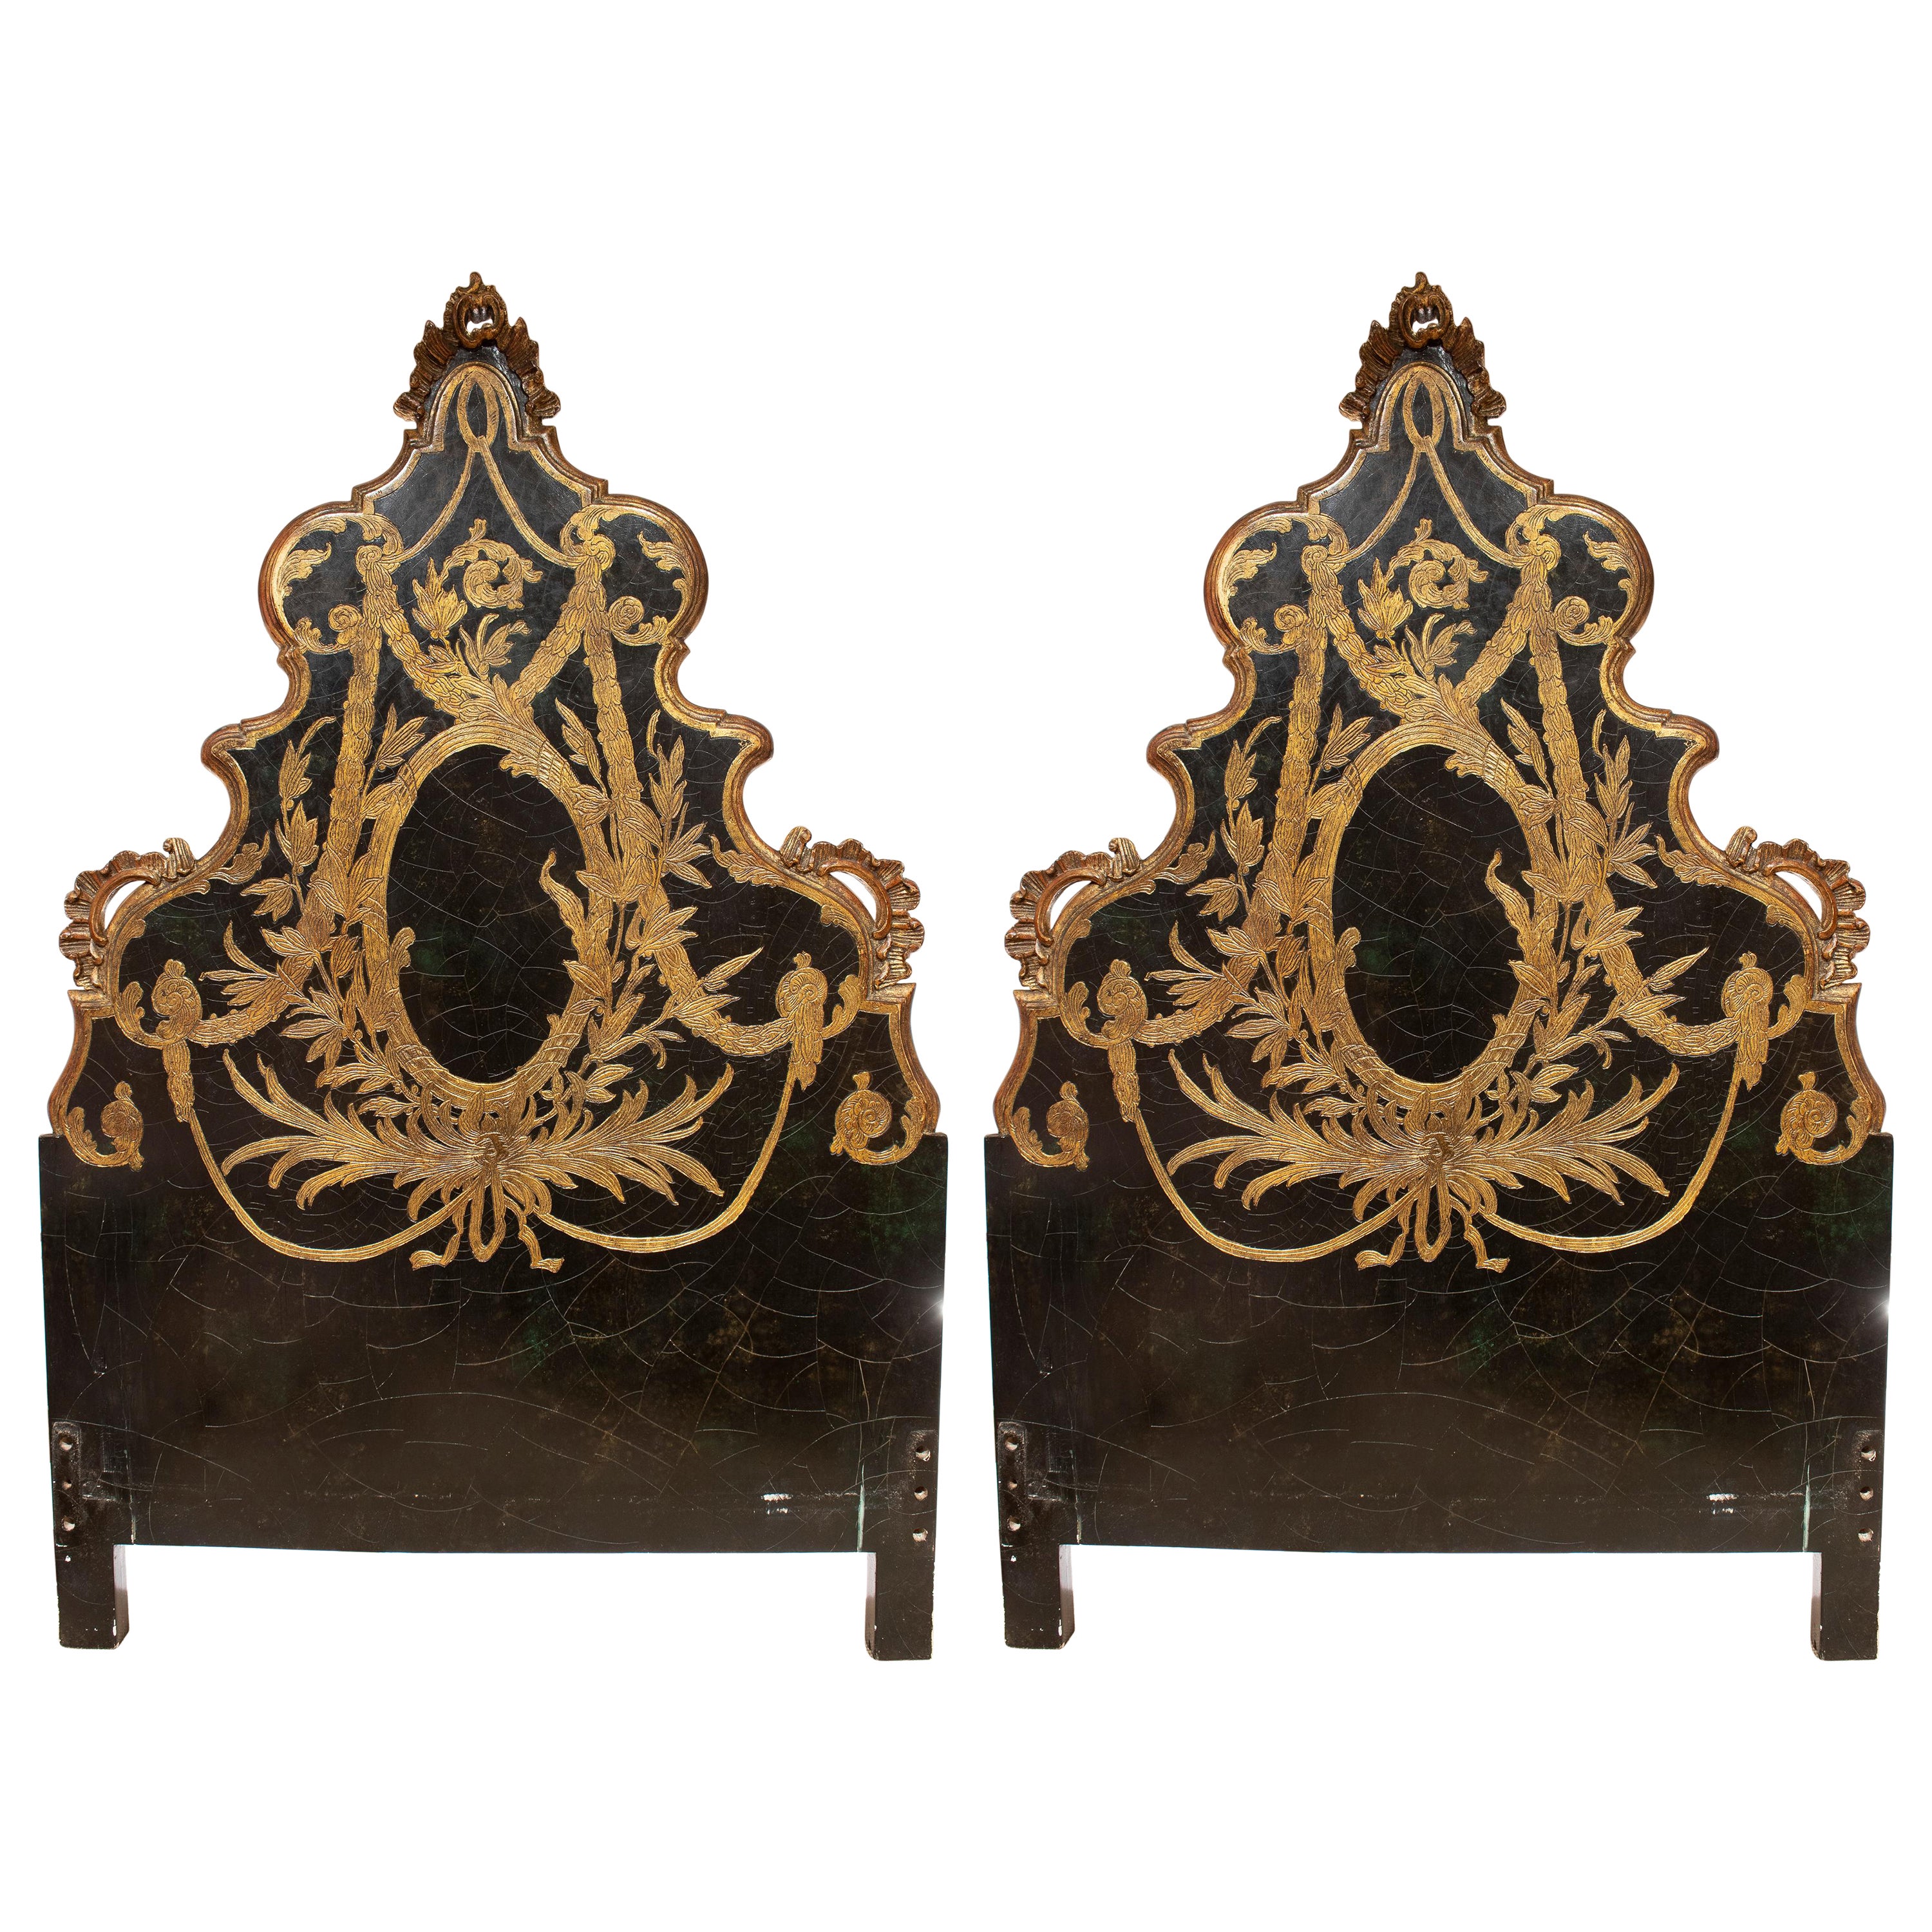 Pair of 1950s Spanish Wooden Beds w/ Rococo Revival Gilt Bed Heads